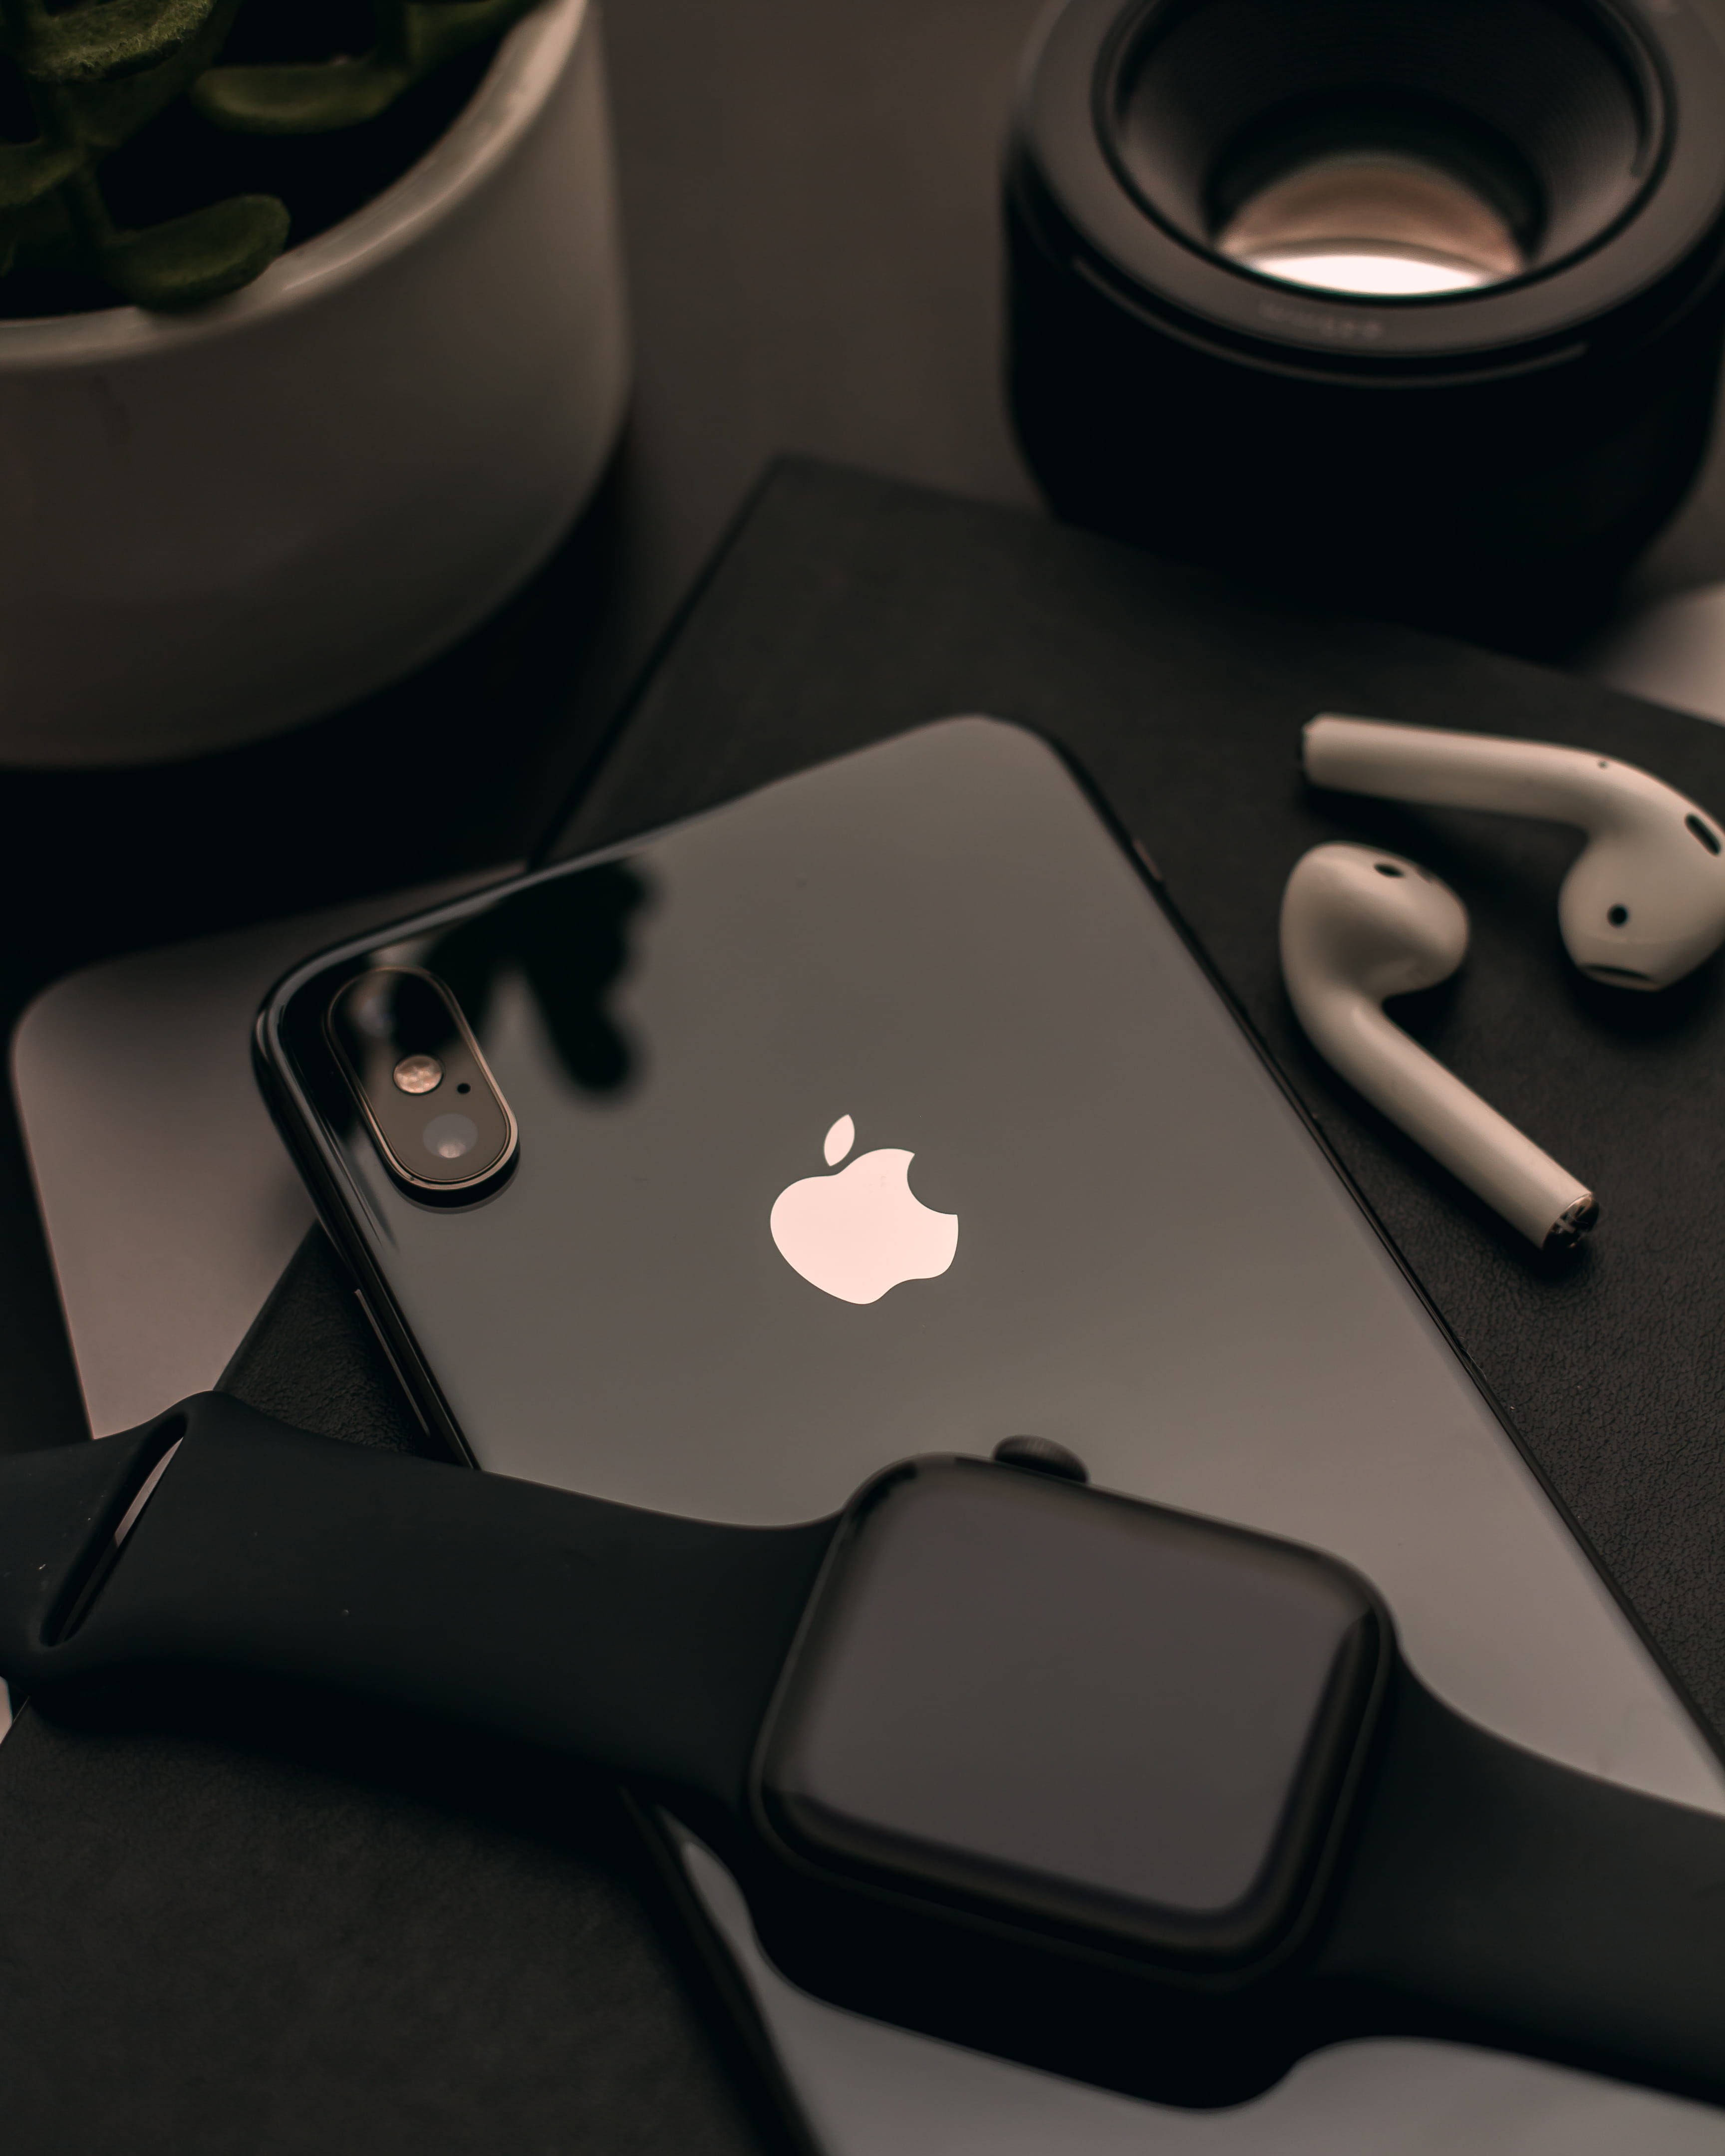 space black Apple Watch over black iPhone X, electronics, cell phone